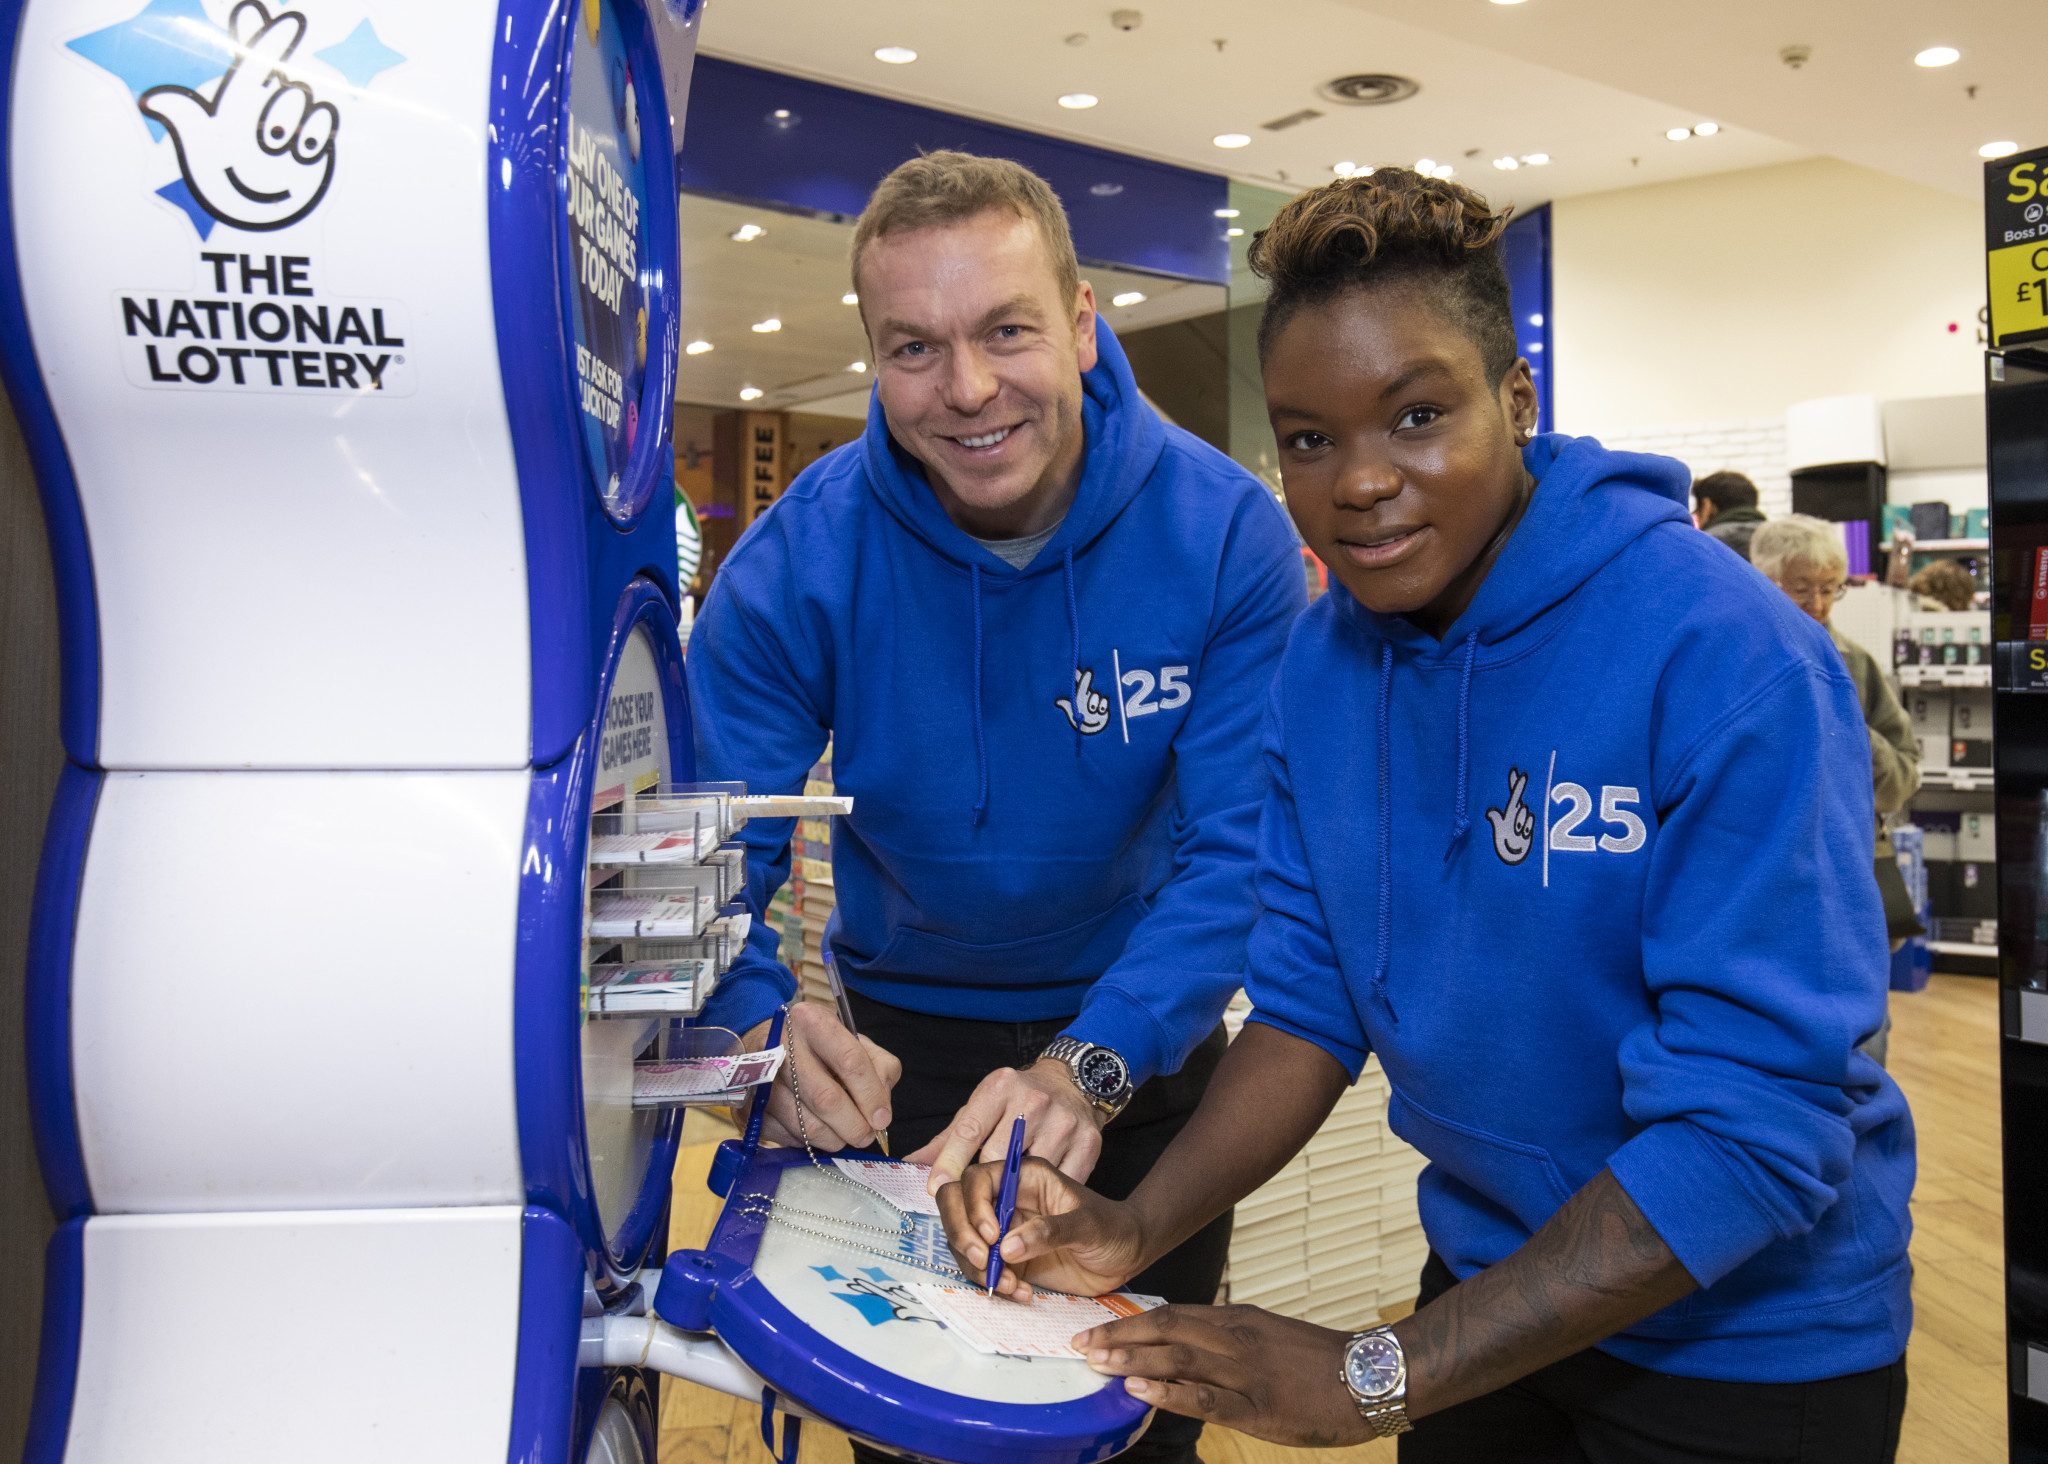 Nicola Adams, pictured here alongside Sir Chris Hoy, has had a huge effect on the popularity of female boxing in the UK ©Getty Images